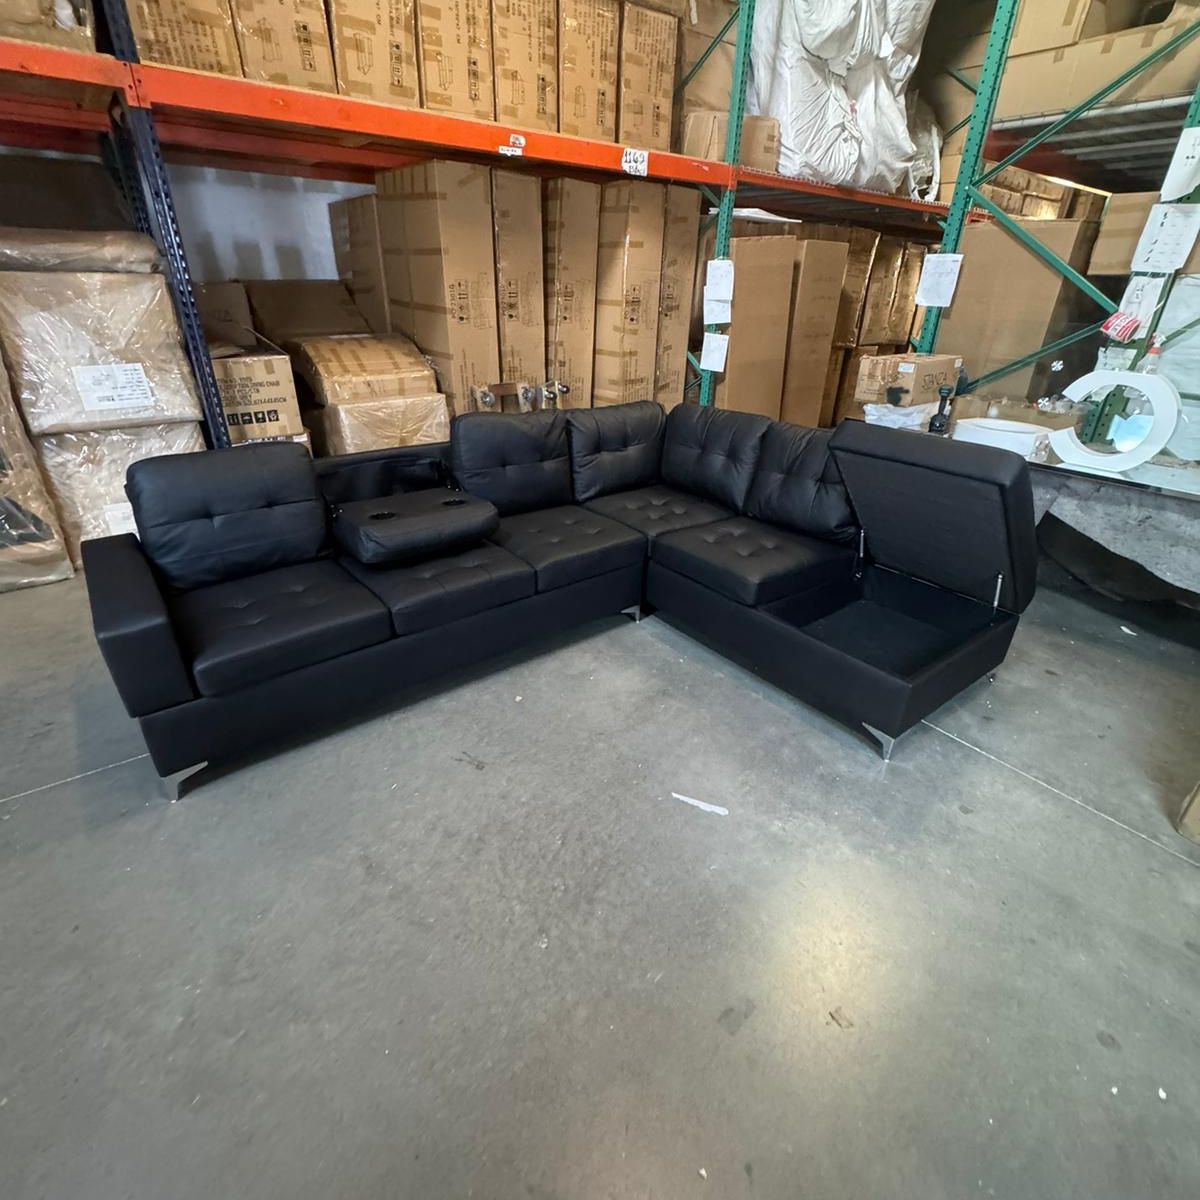 Brand new sectional in box- shop now pay later. $49 Down 